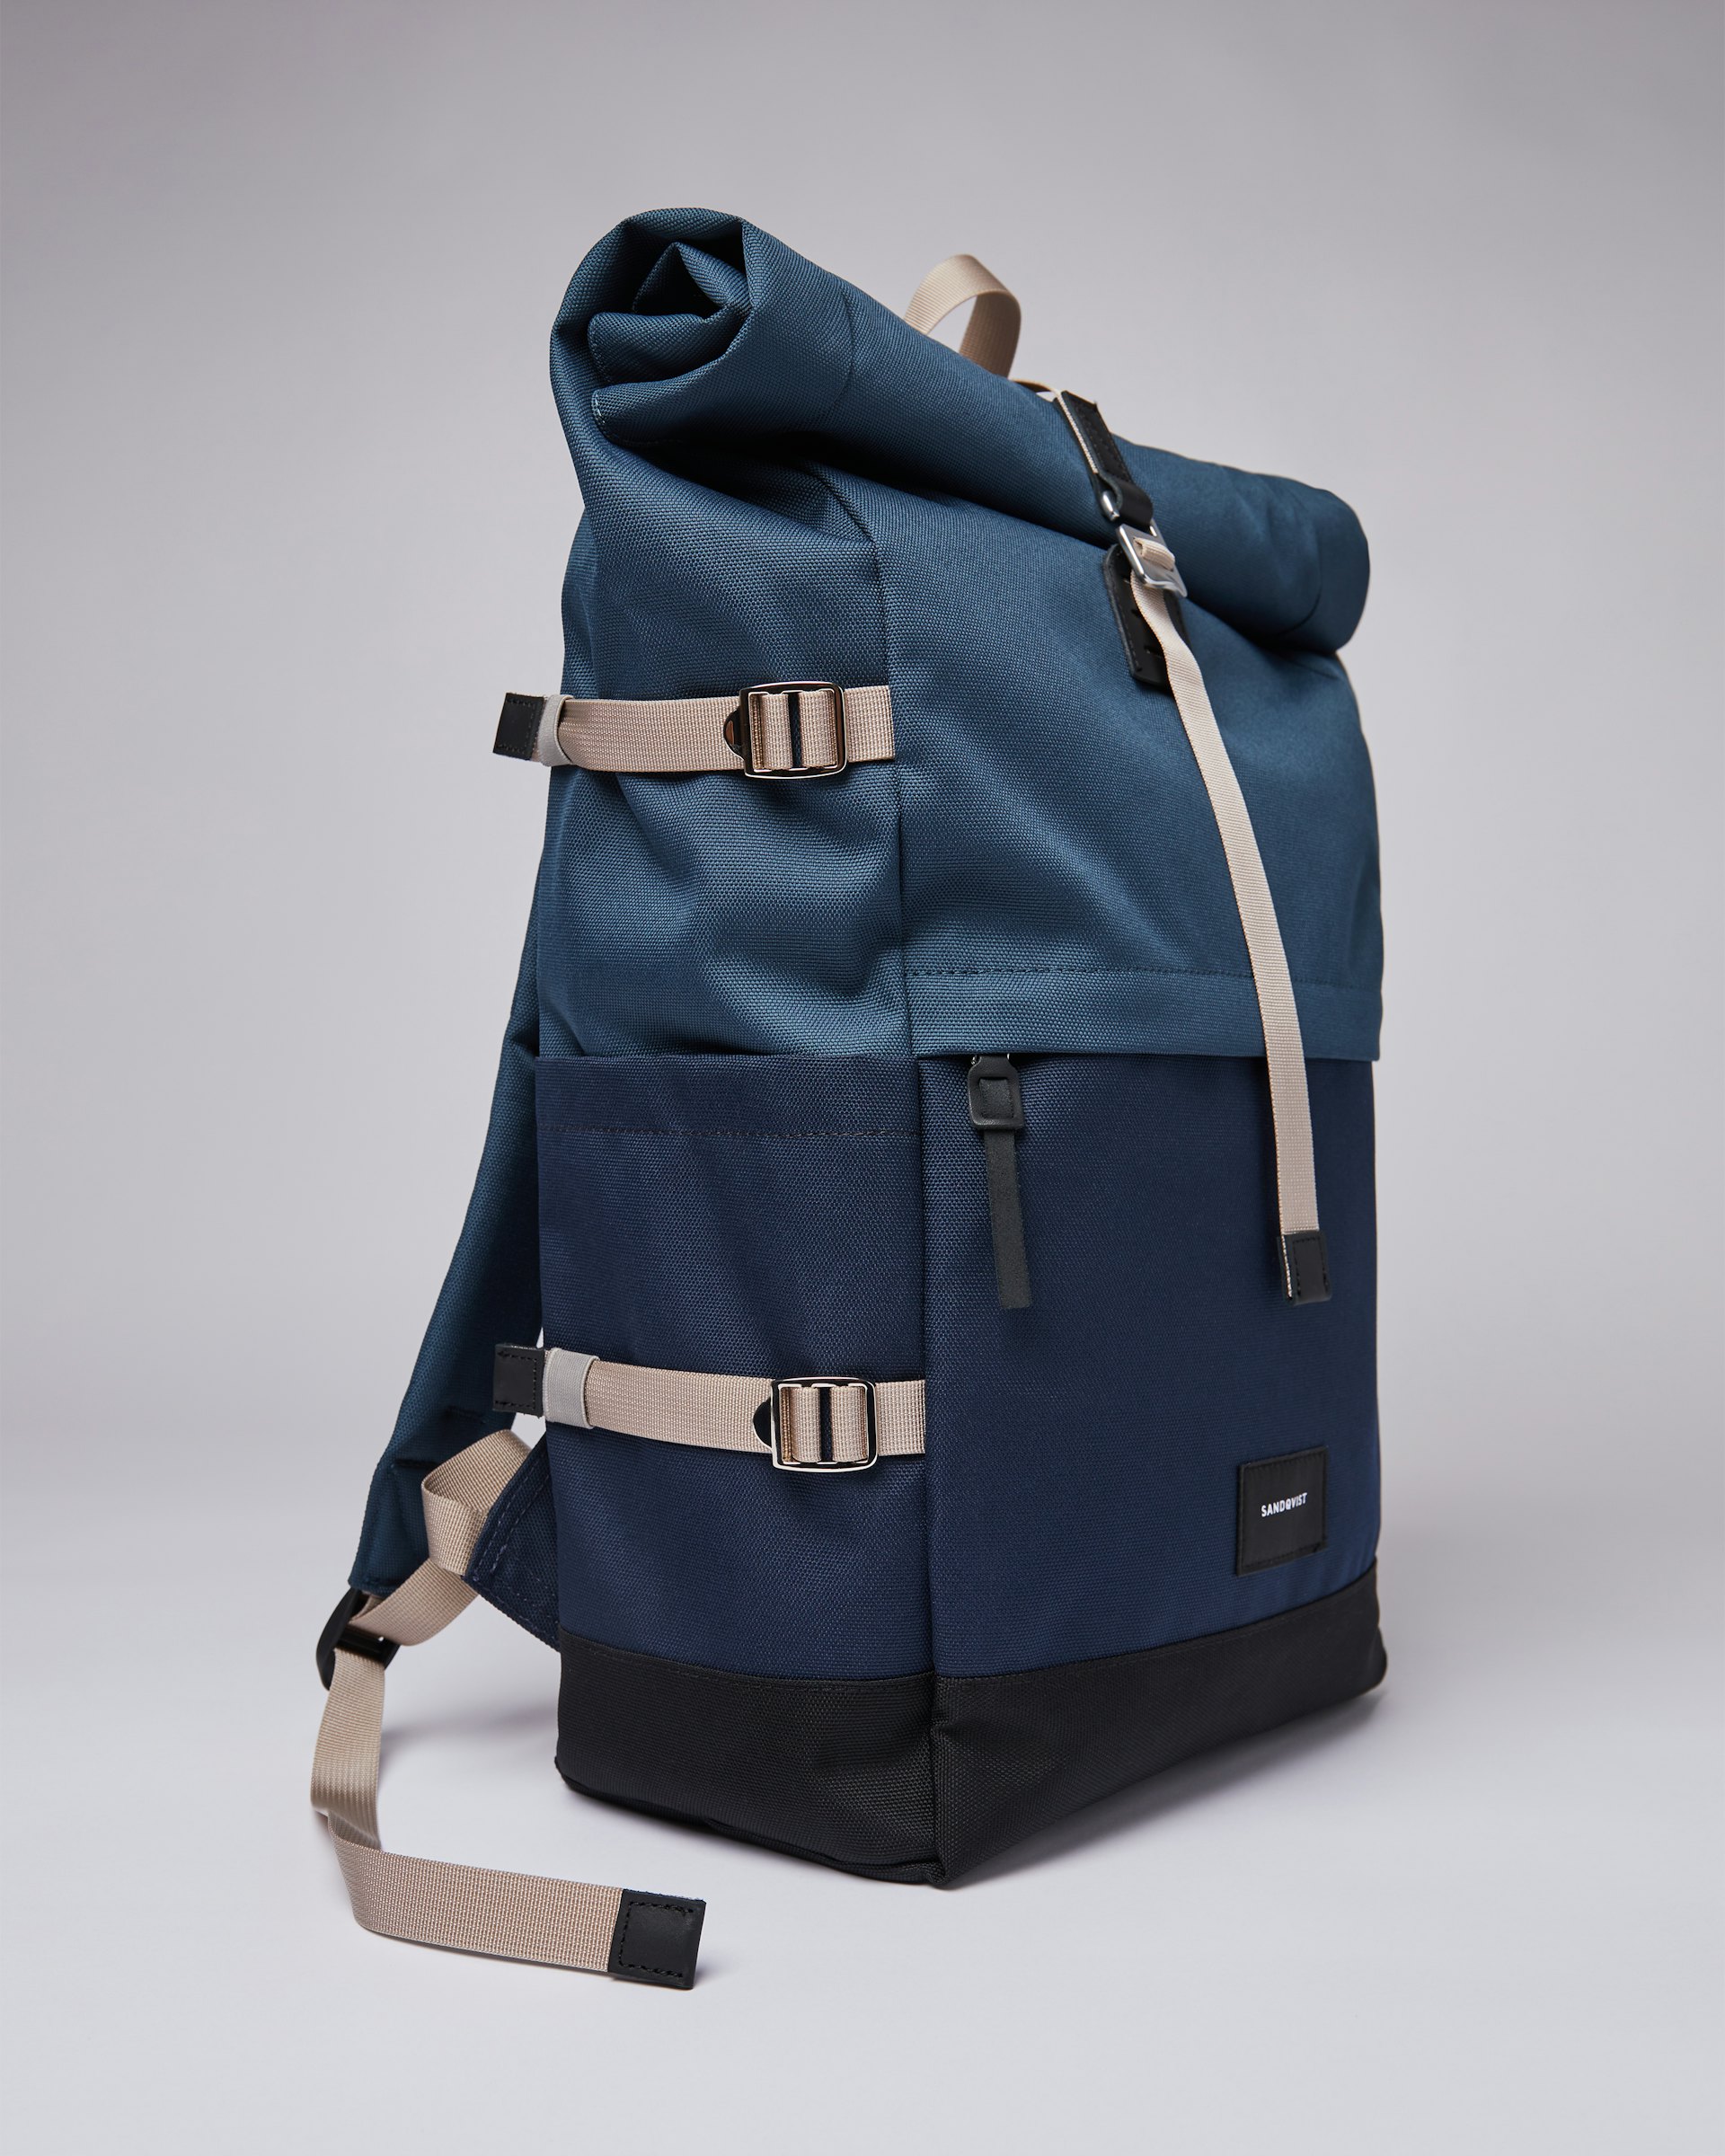 Bernt belongs to the category Backpacks and is in color steel blue & navy (4 of 7)